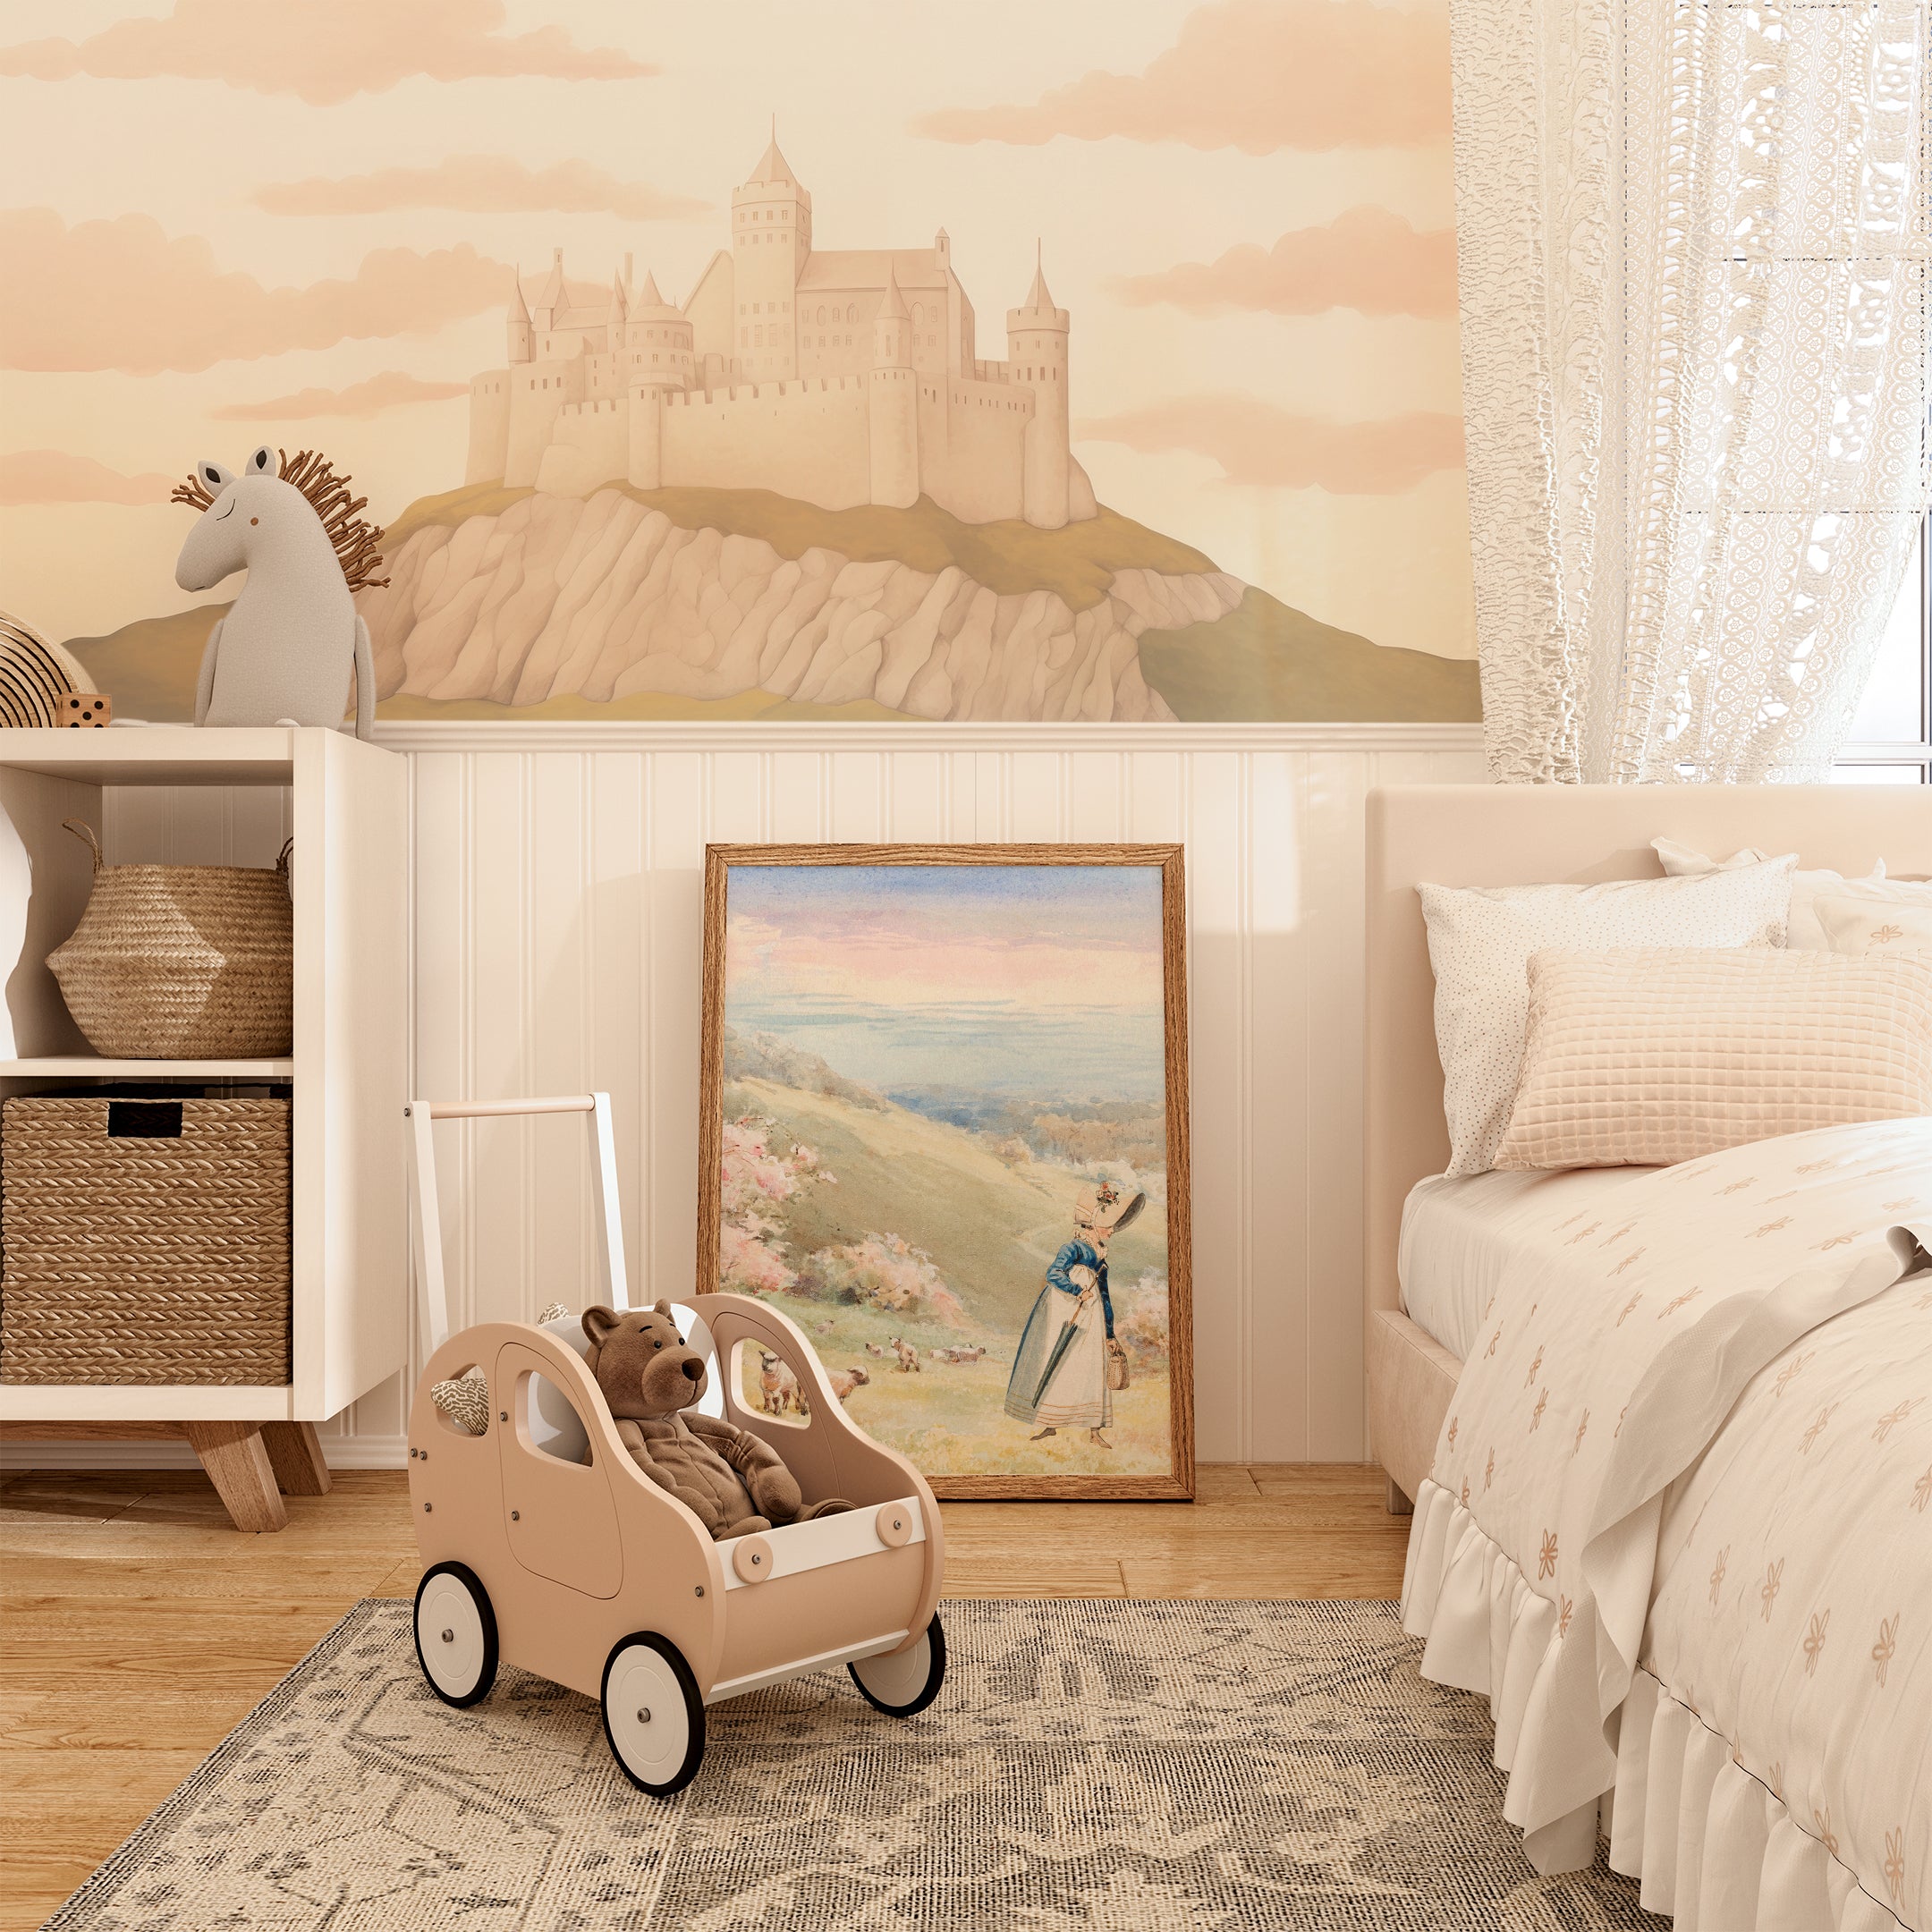 Play area in a child's room with a pastel castle mural backdrop, featuring wooden toys and playful décor.